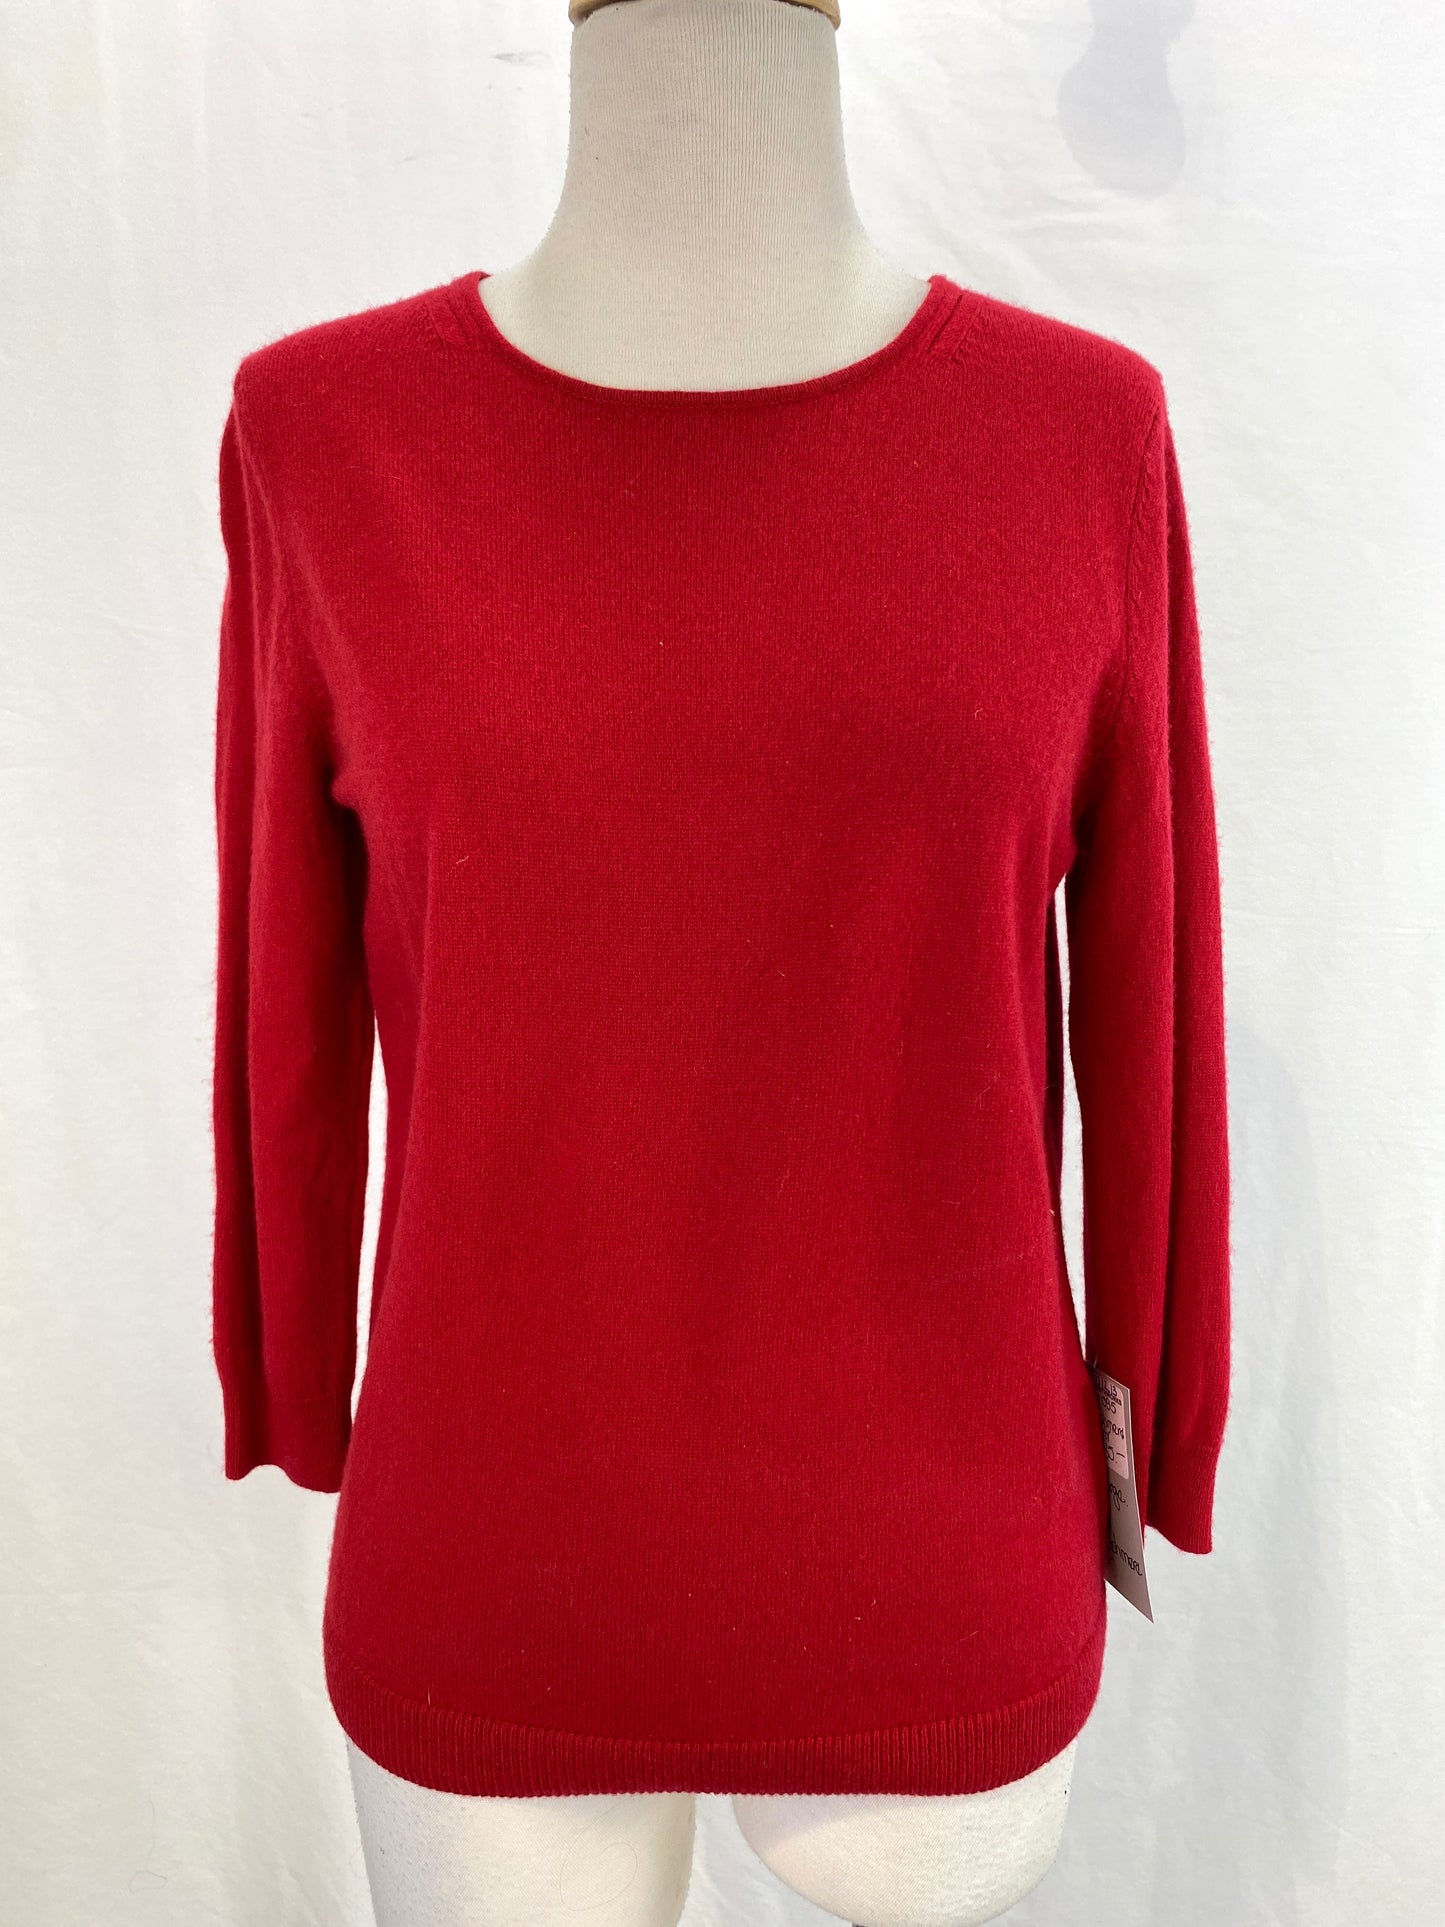 Talbots red round neck cashmere sweater with 3/4 length sleeves. Ian Drummond Vintage. 